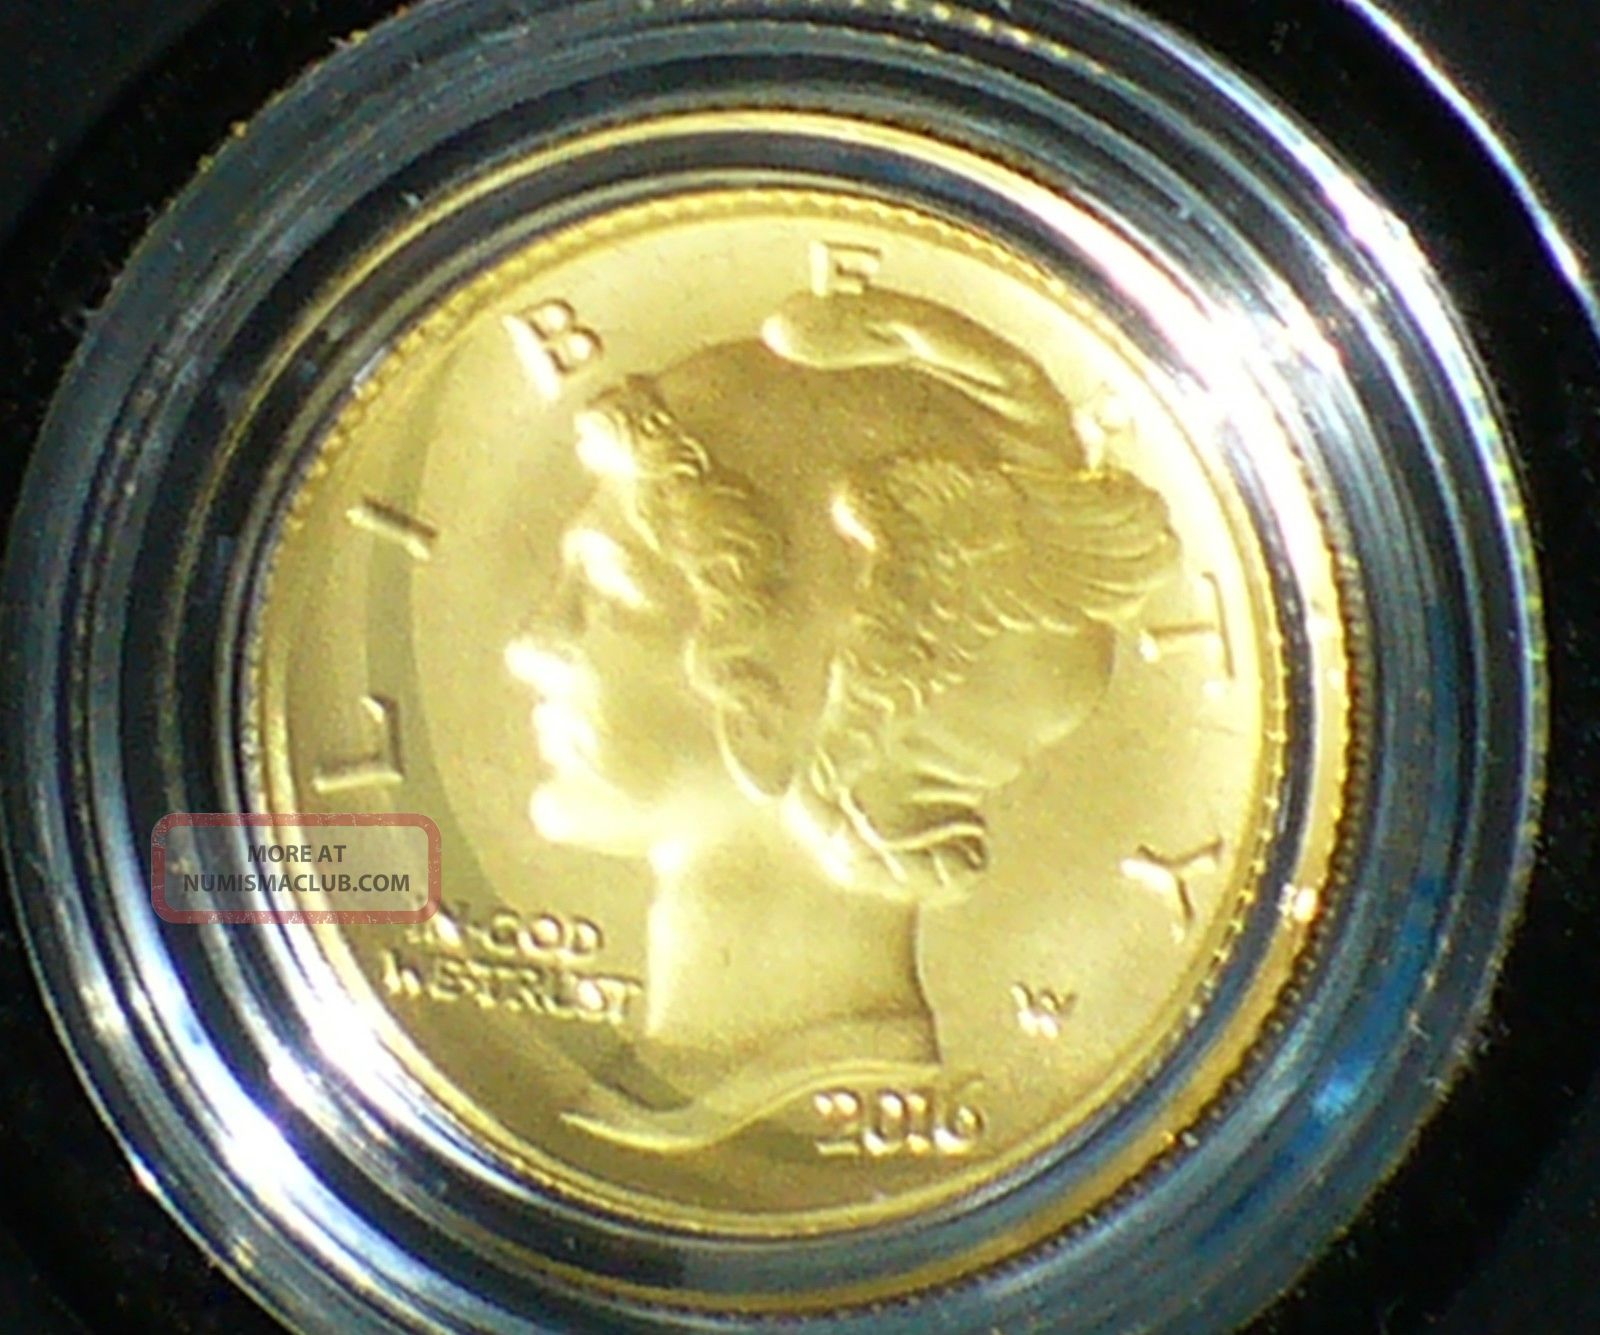 2016-mercury-gold-dime-1-10-oz-pure-gold-centennial-hottest-coin-of-the